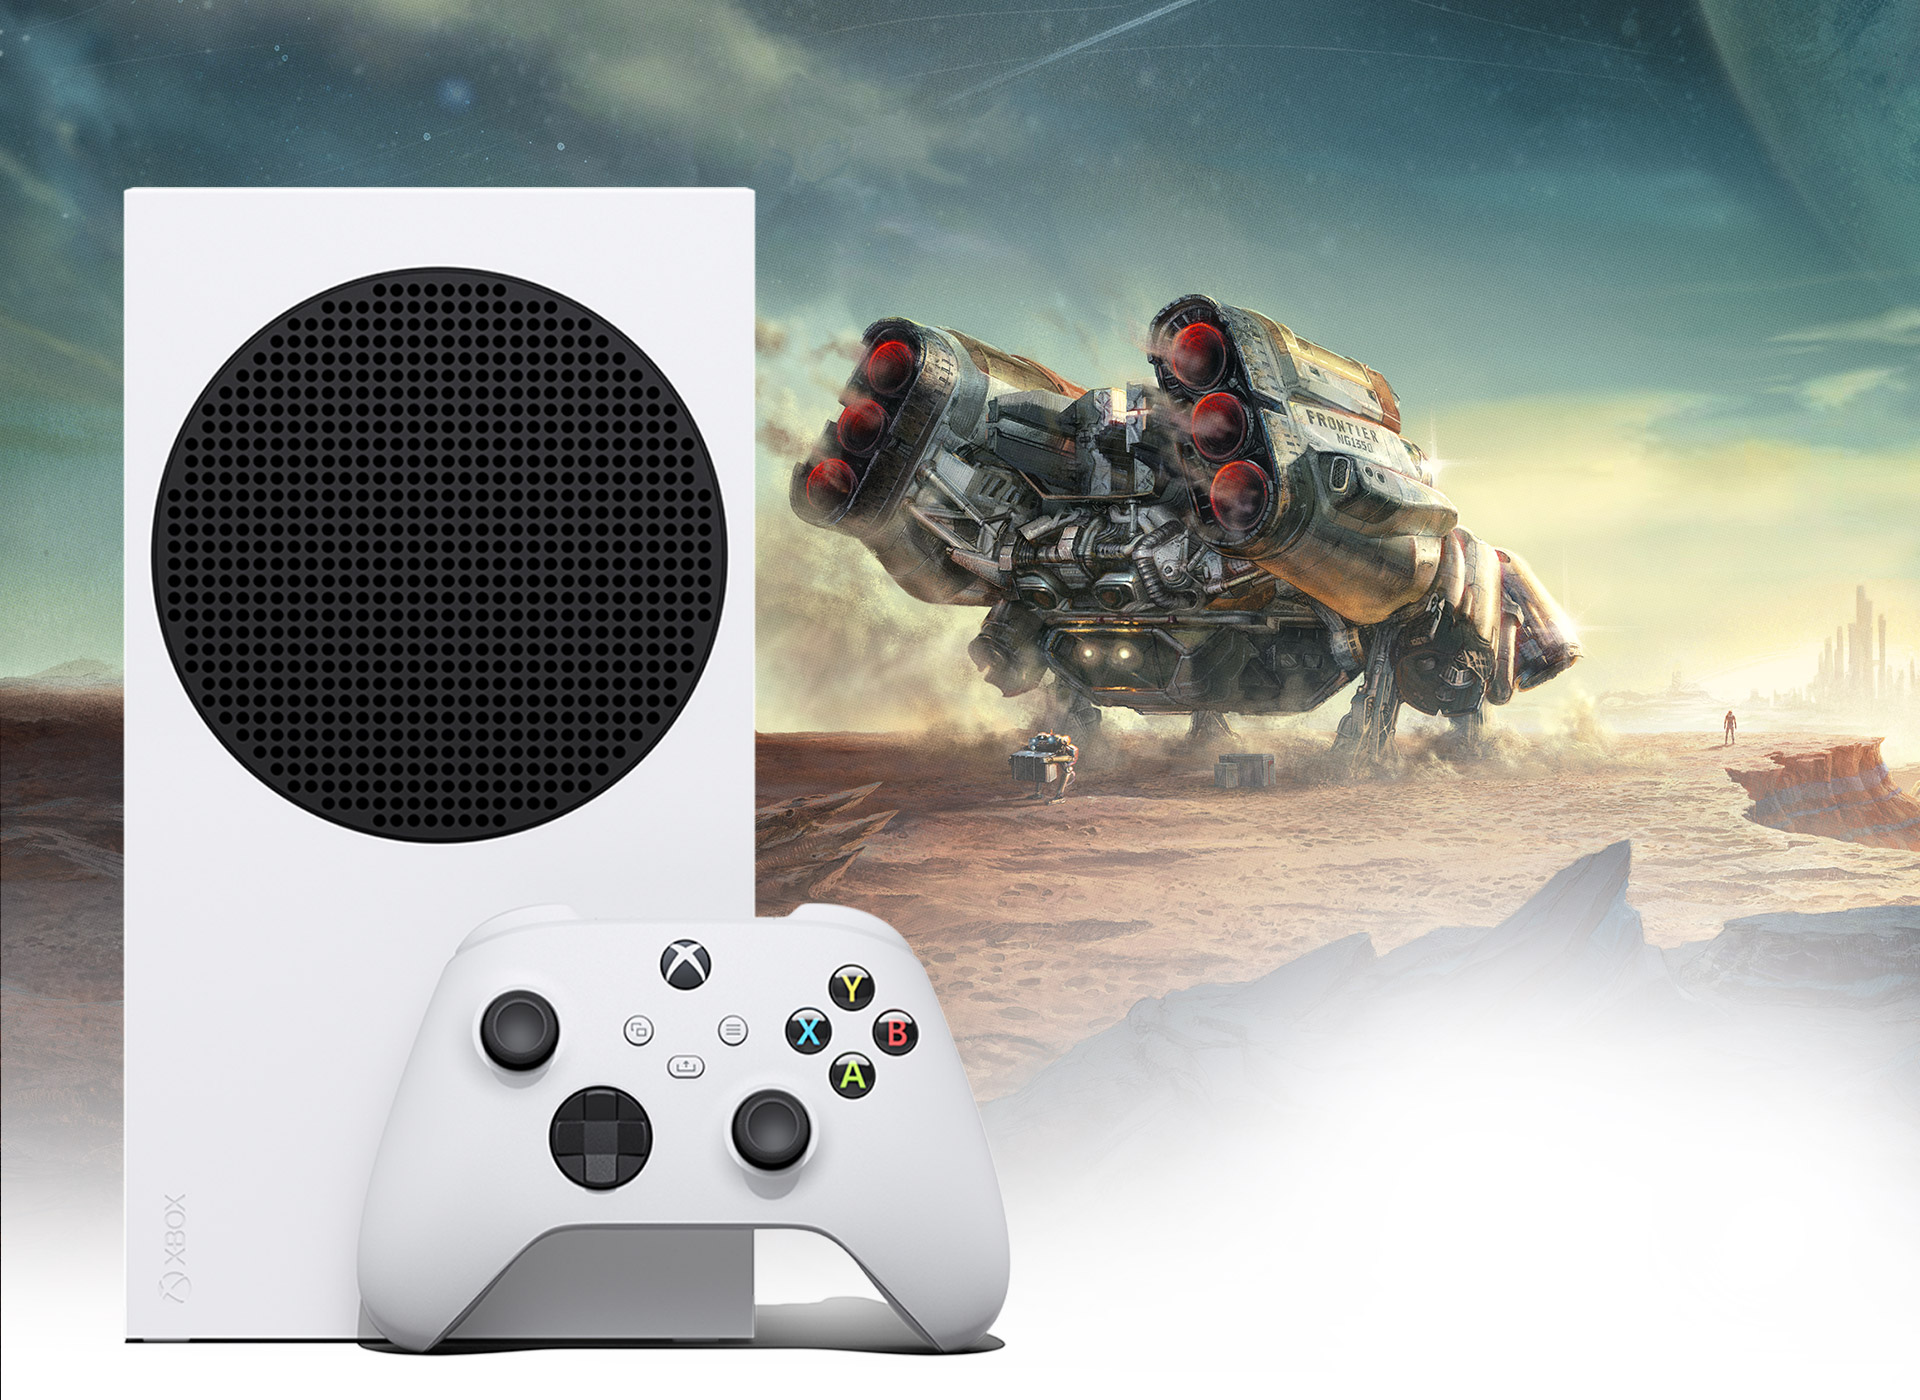 Xbox Series S next to a space ship on a Starfield planet